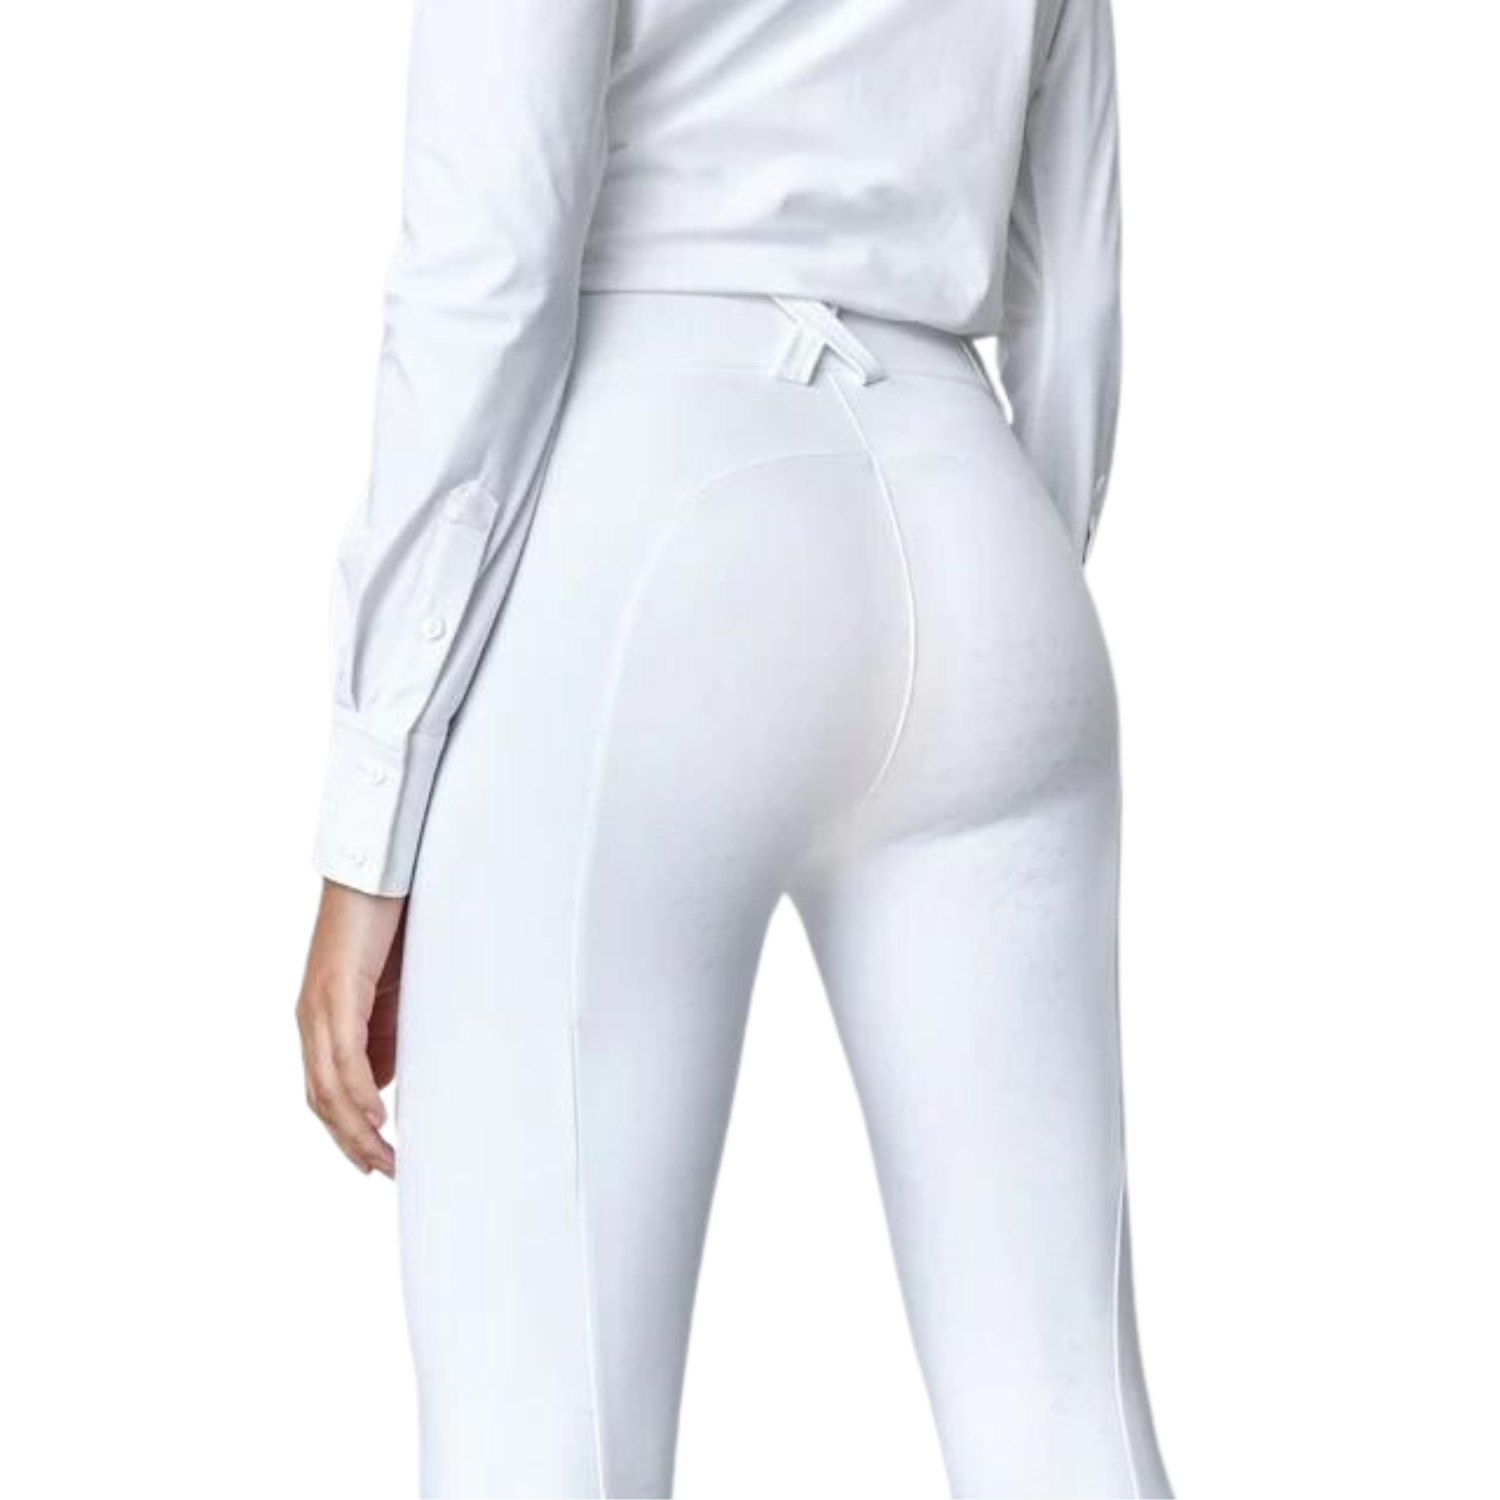 Ladies Compression High Rise Performance Knee Grip Breeches - White